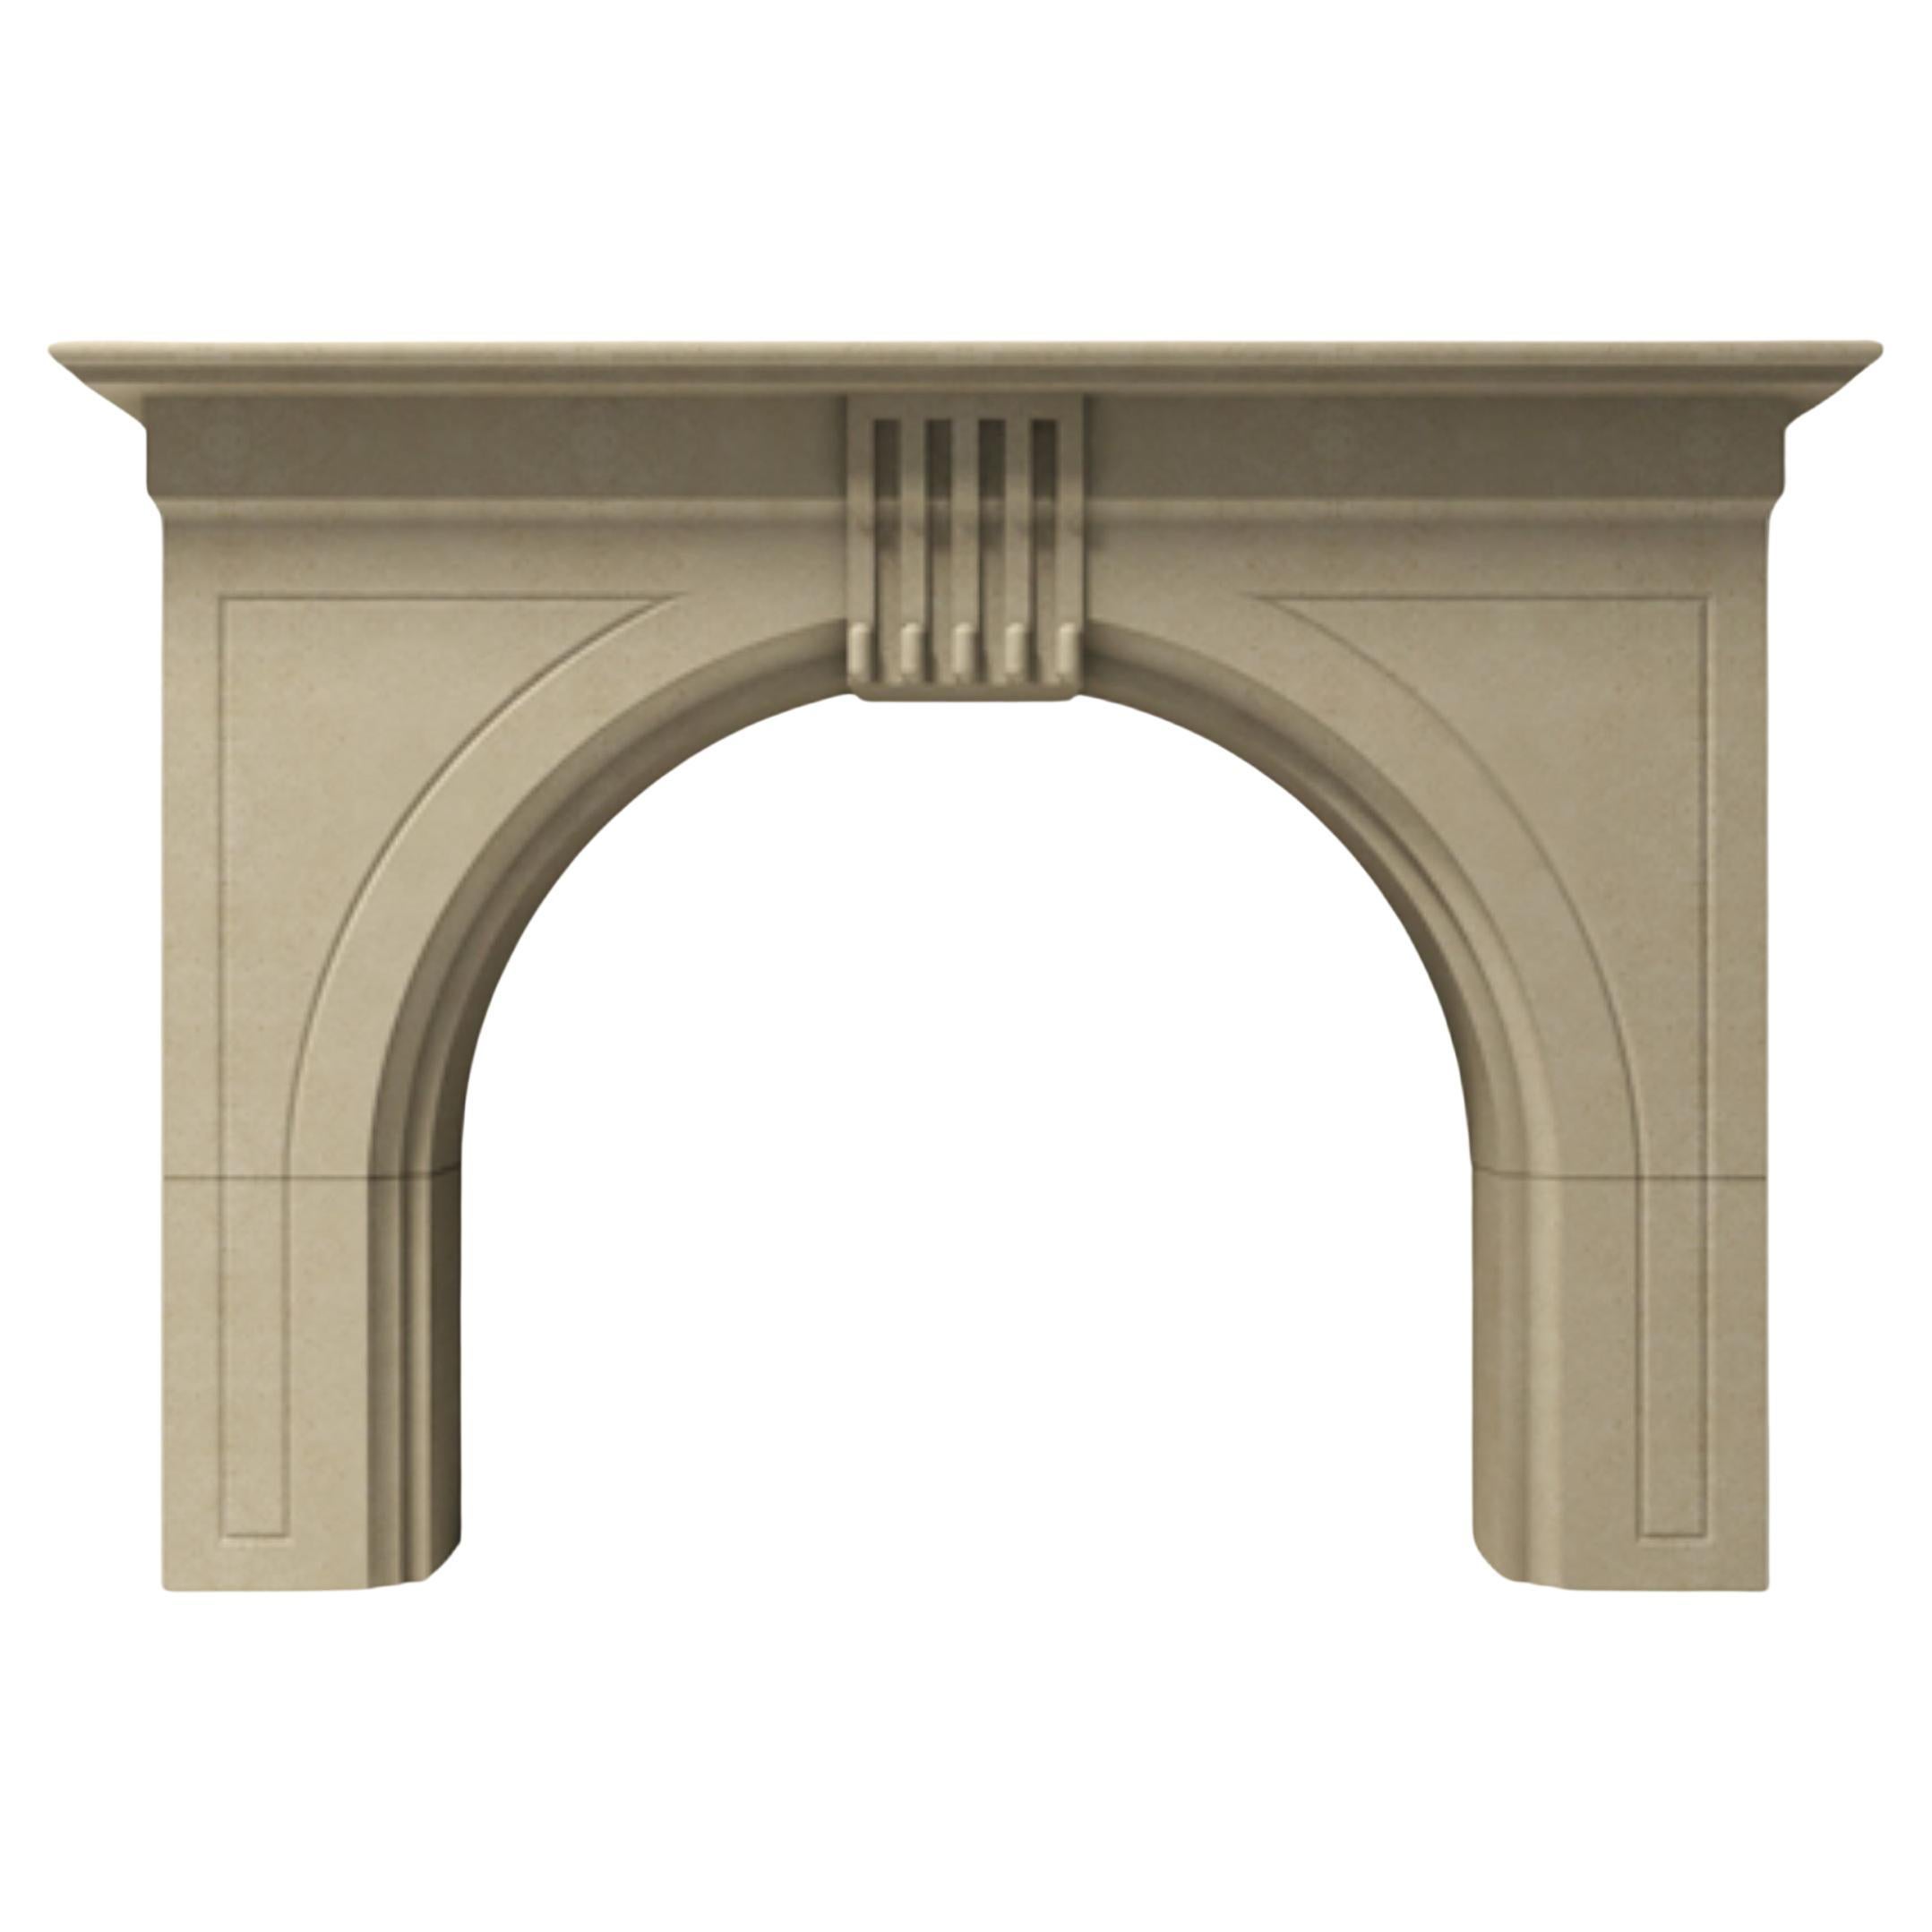 The Josephine: A Classic Victorian-Styled Stone Fireplace with Arched Opening